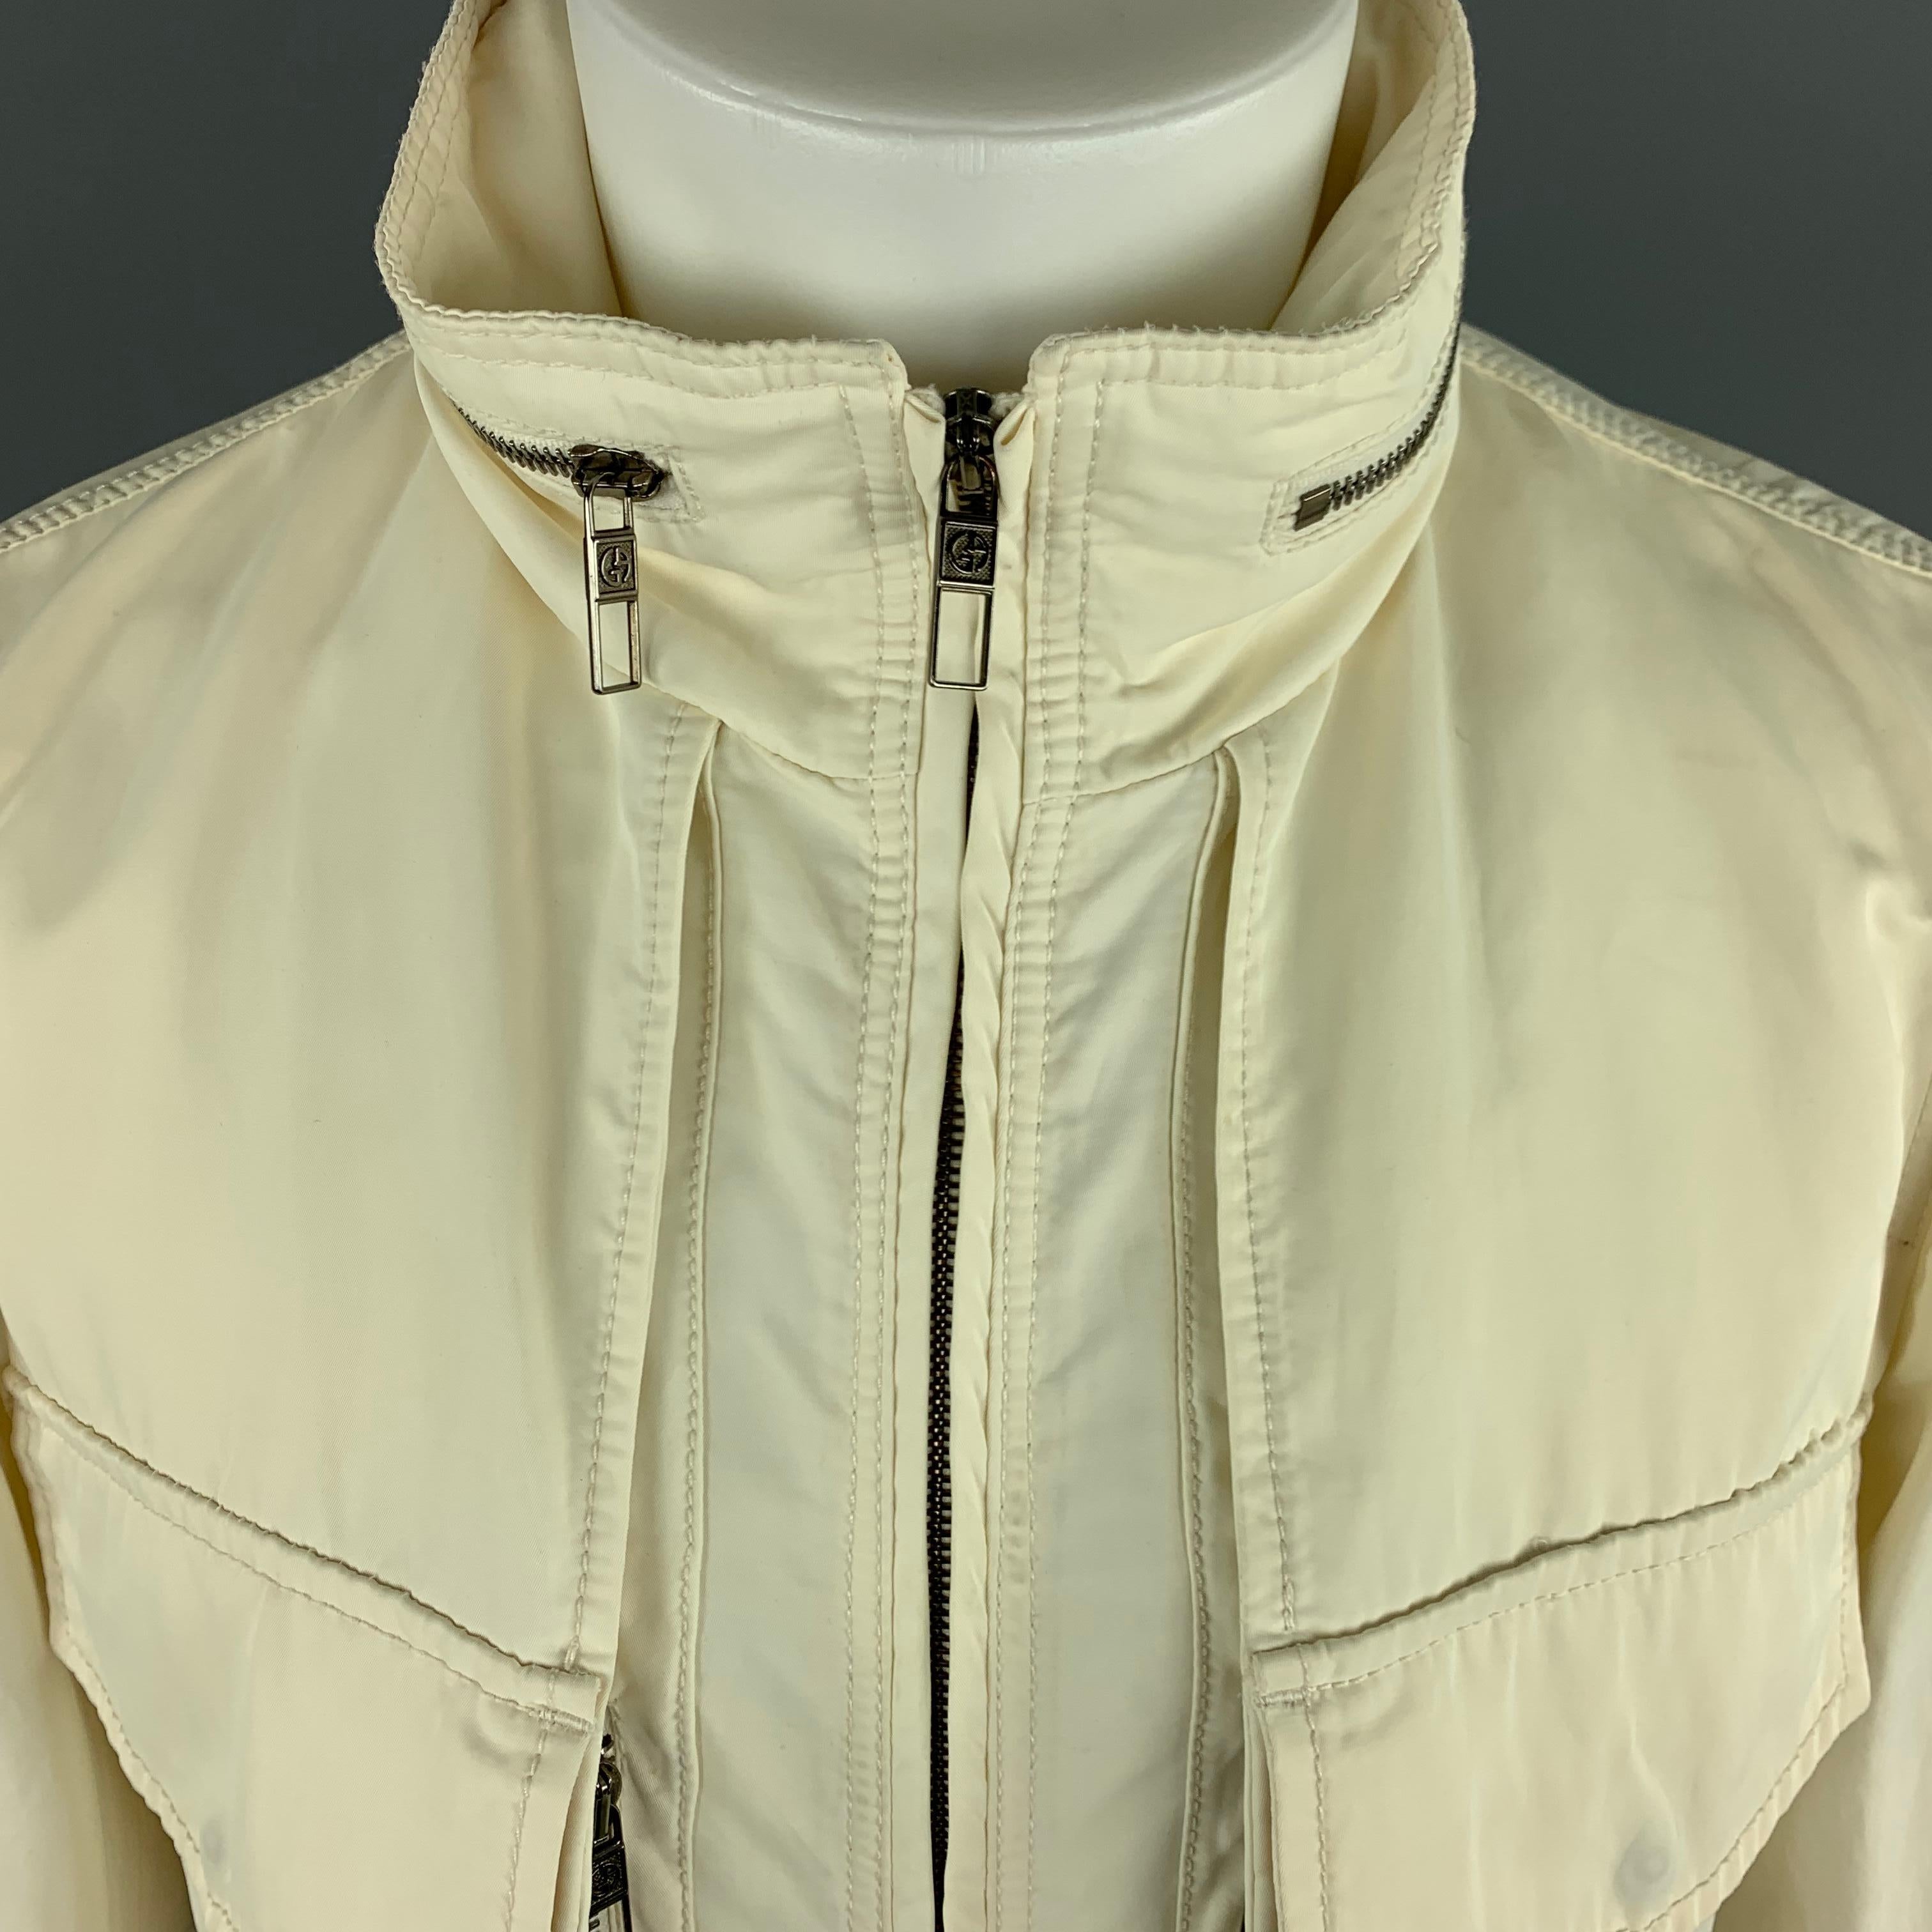 GIORGIO ARMANI Jacket comes in a cream tone in a solid cotton / nylon material, with a high collar, patch pockets, a hood, zip up. Made in Italy.
 
Excellent Pre-Owned Condition.
Marked: IT 48
 
Measurements:
 
Shoulder: 16 in.
Chest: 40 in.
Sleeve: